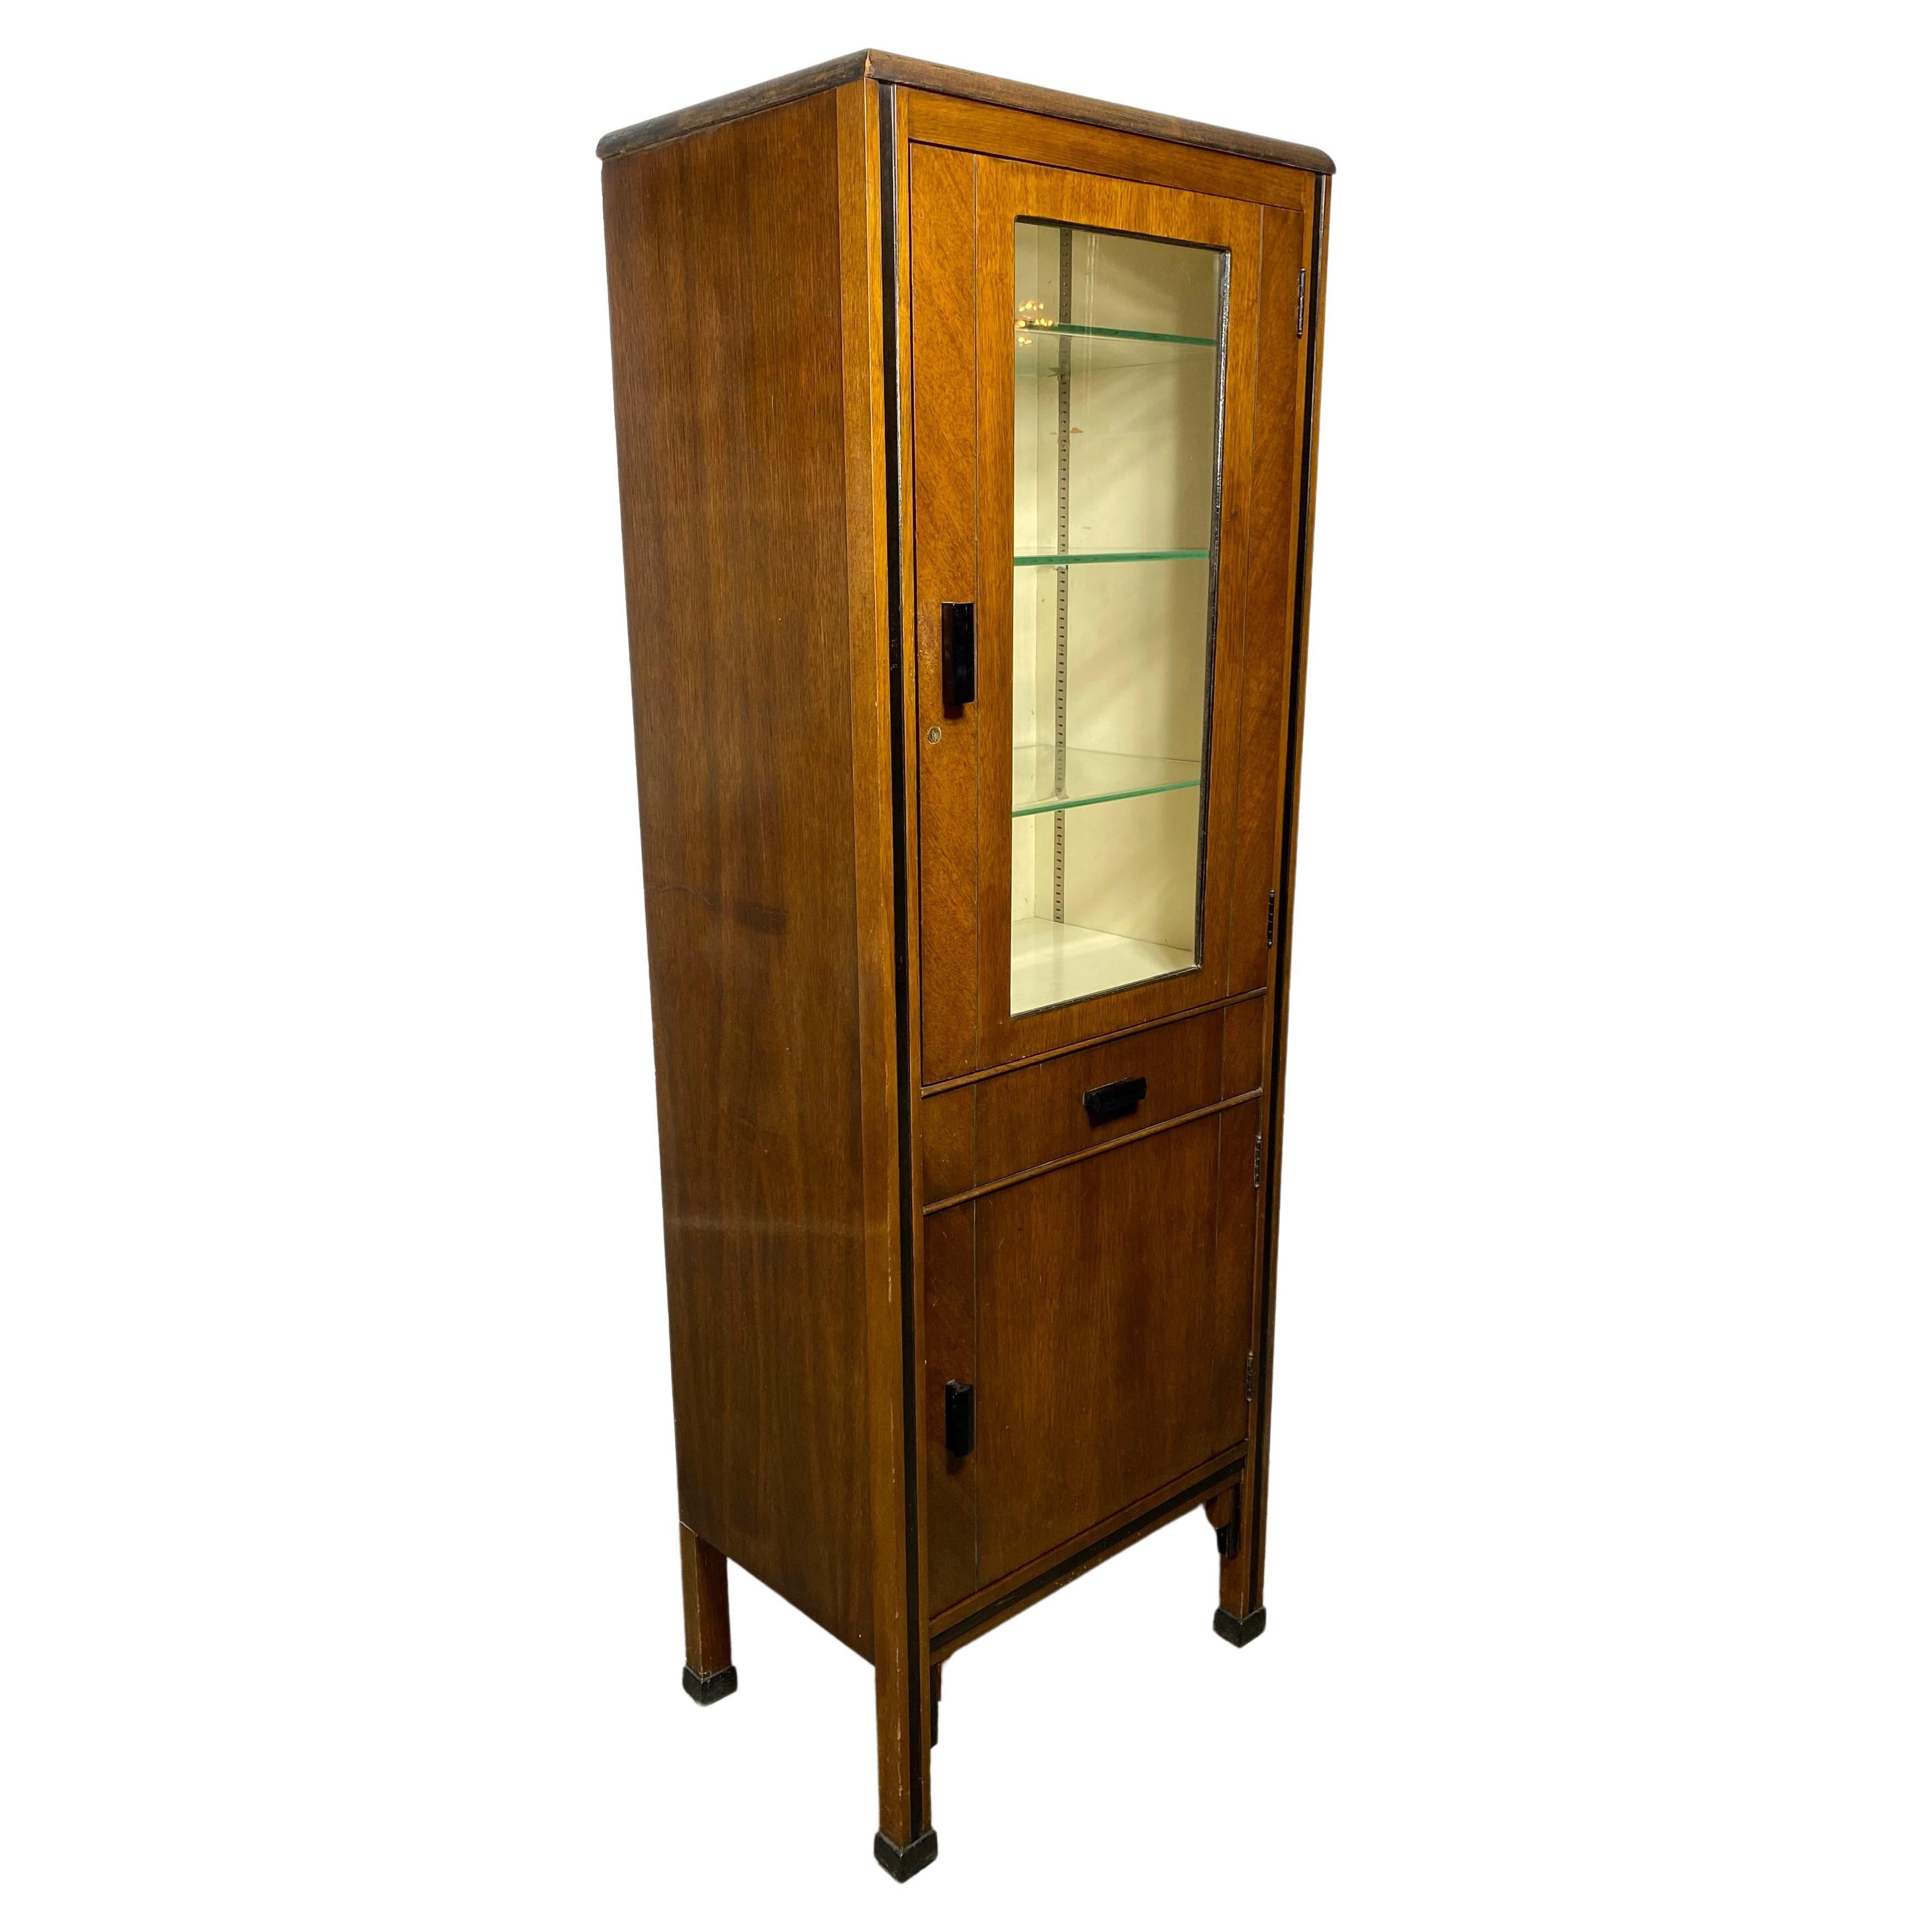 Elegant Art Deco Dental cabinet, walnut and glass, manufactured by ENOCHS For Sale